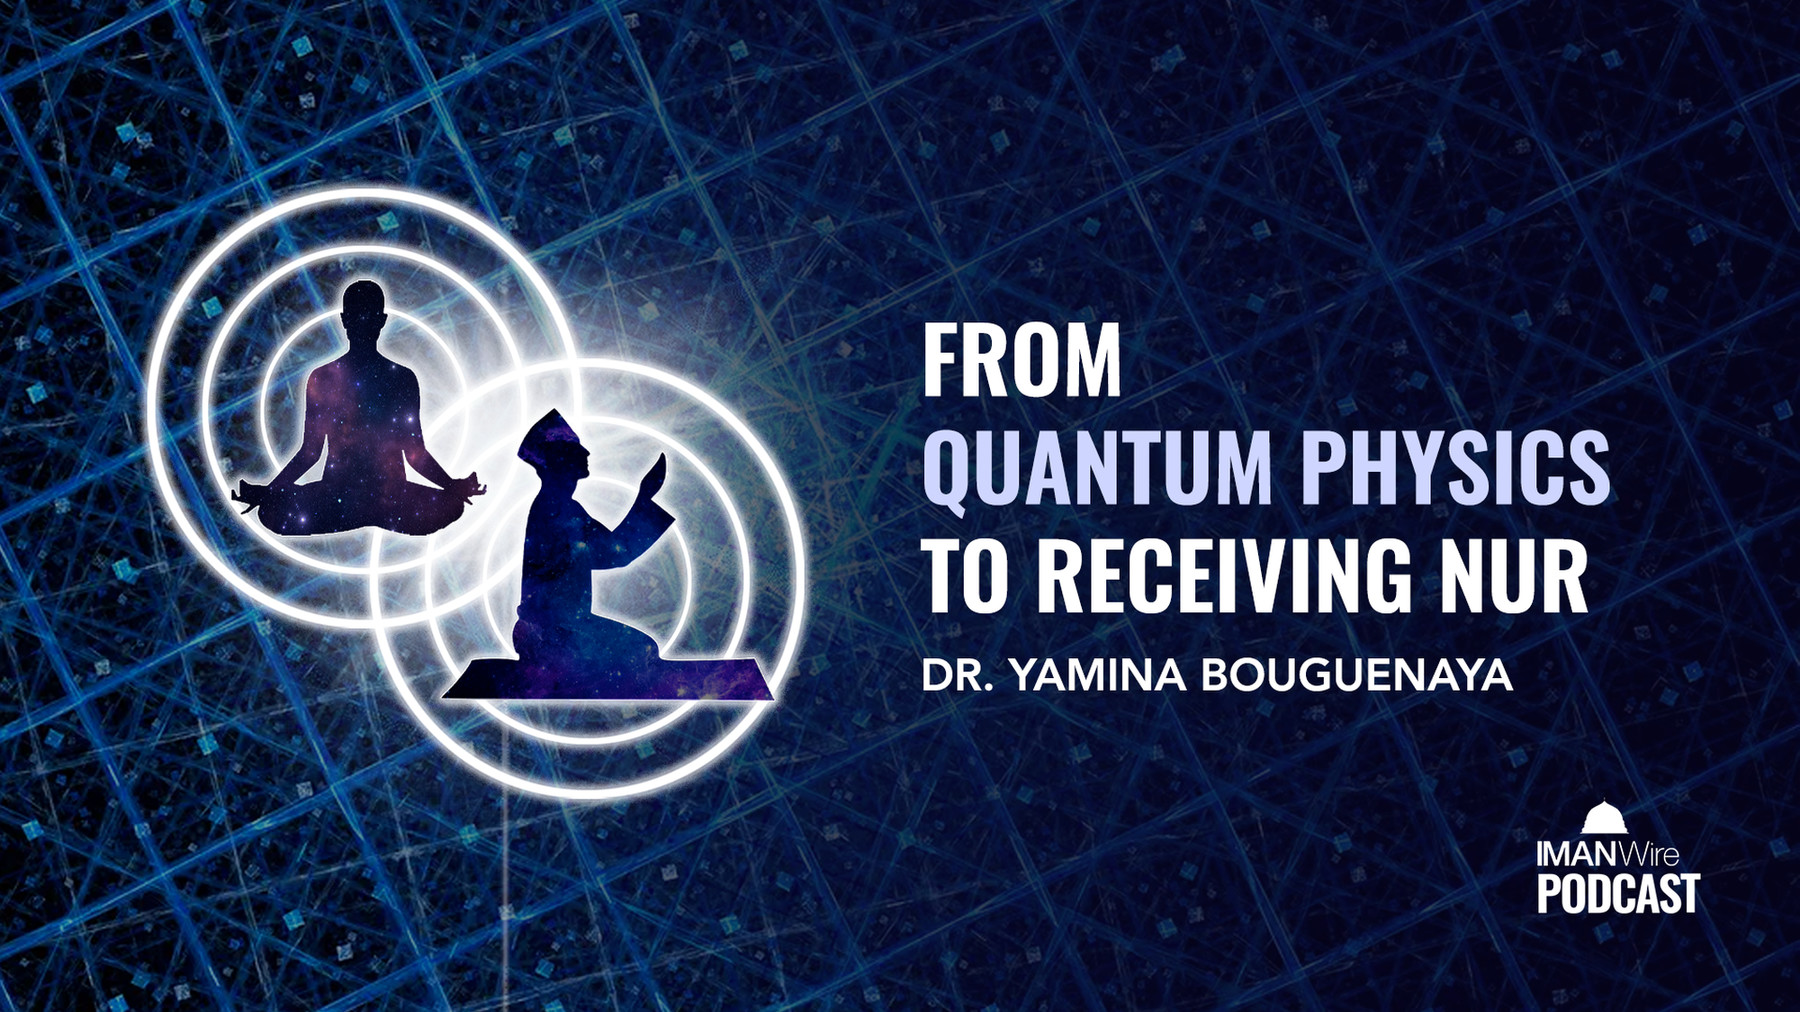 20210105 THUMBNAIL From Quantum Physics to Receiving Nur 1920x1080